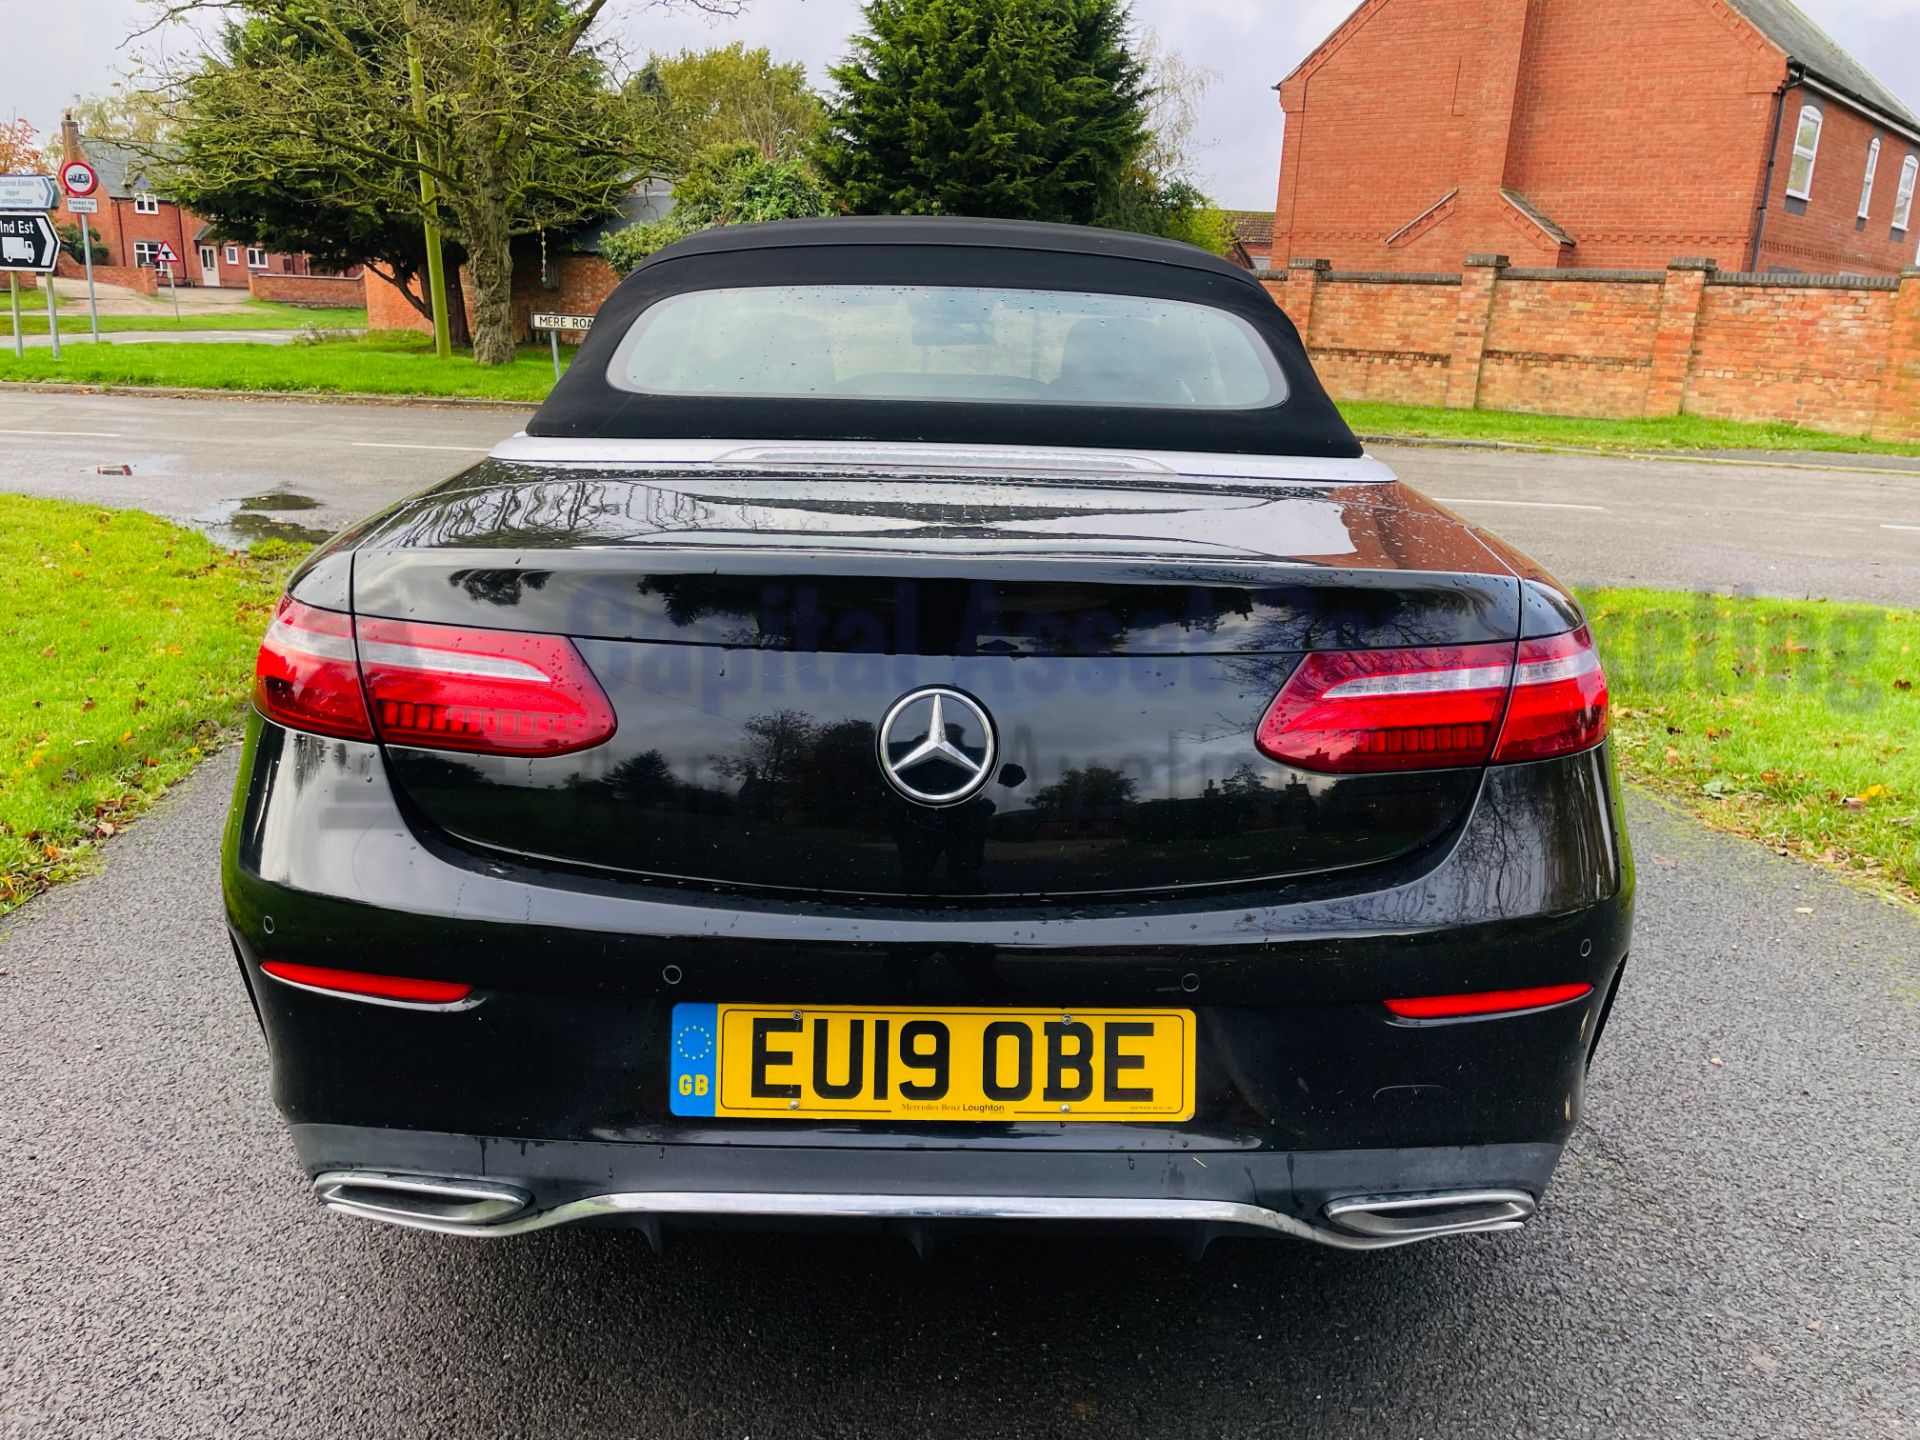 MERCEDES-BENZ E220D *AMG LINE - CABRIOLET* (2019 - EURO 6) '9G TRONIC AUTO - SAT NAV' *FULLY LOADED* - Image 22 of 66